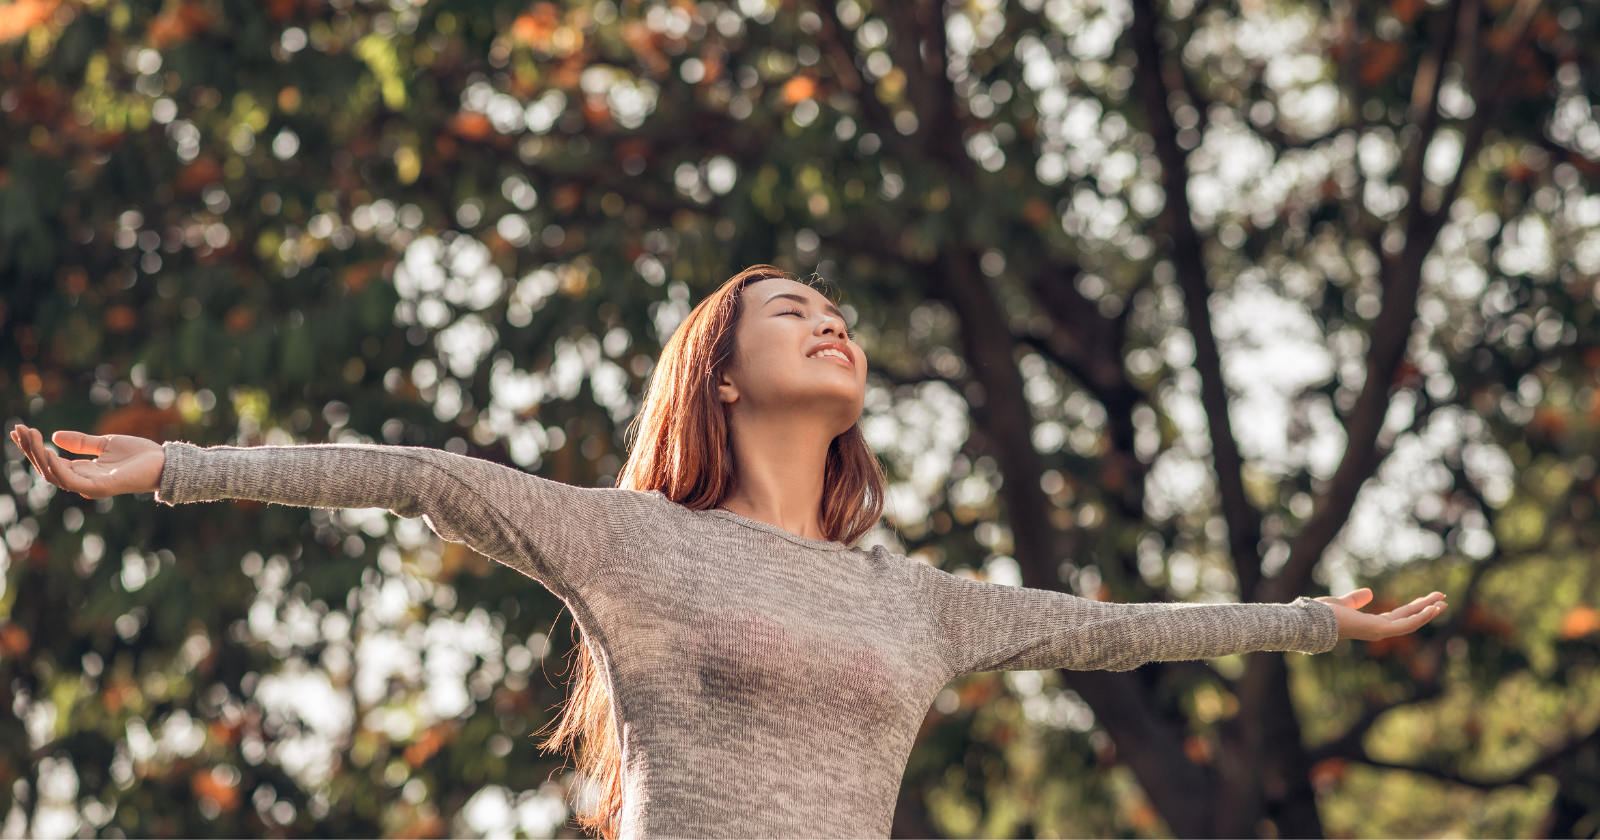 If you find joy in these 9 simple things, you're living an uncommonly happy  life